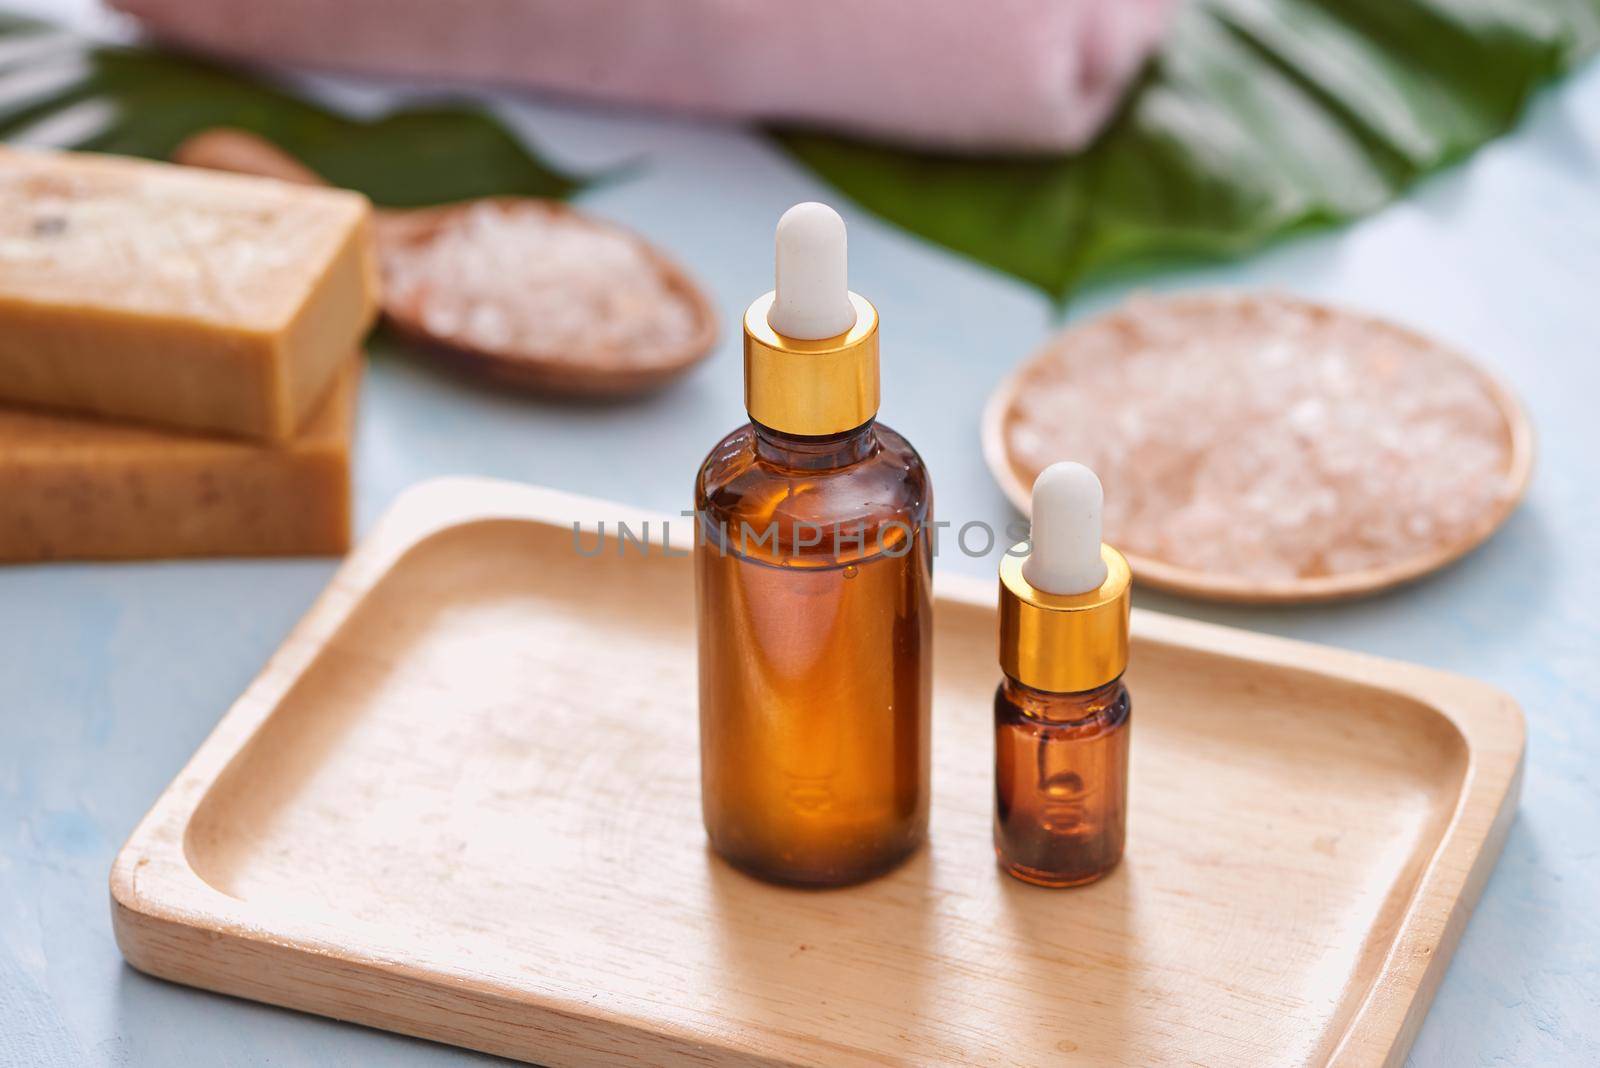 vials and droppers .the natural beauty skincare product for branding with the organic ingredient extract , leaf ,oil and laboratory glass ware by makidotvn